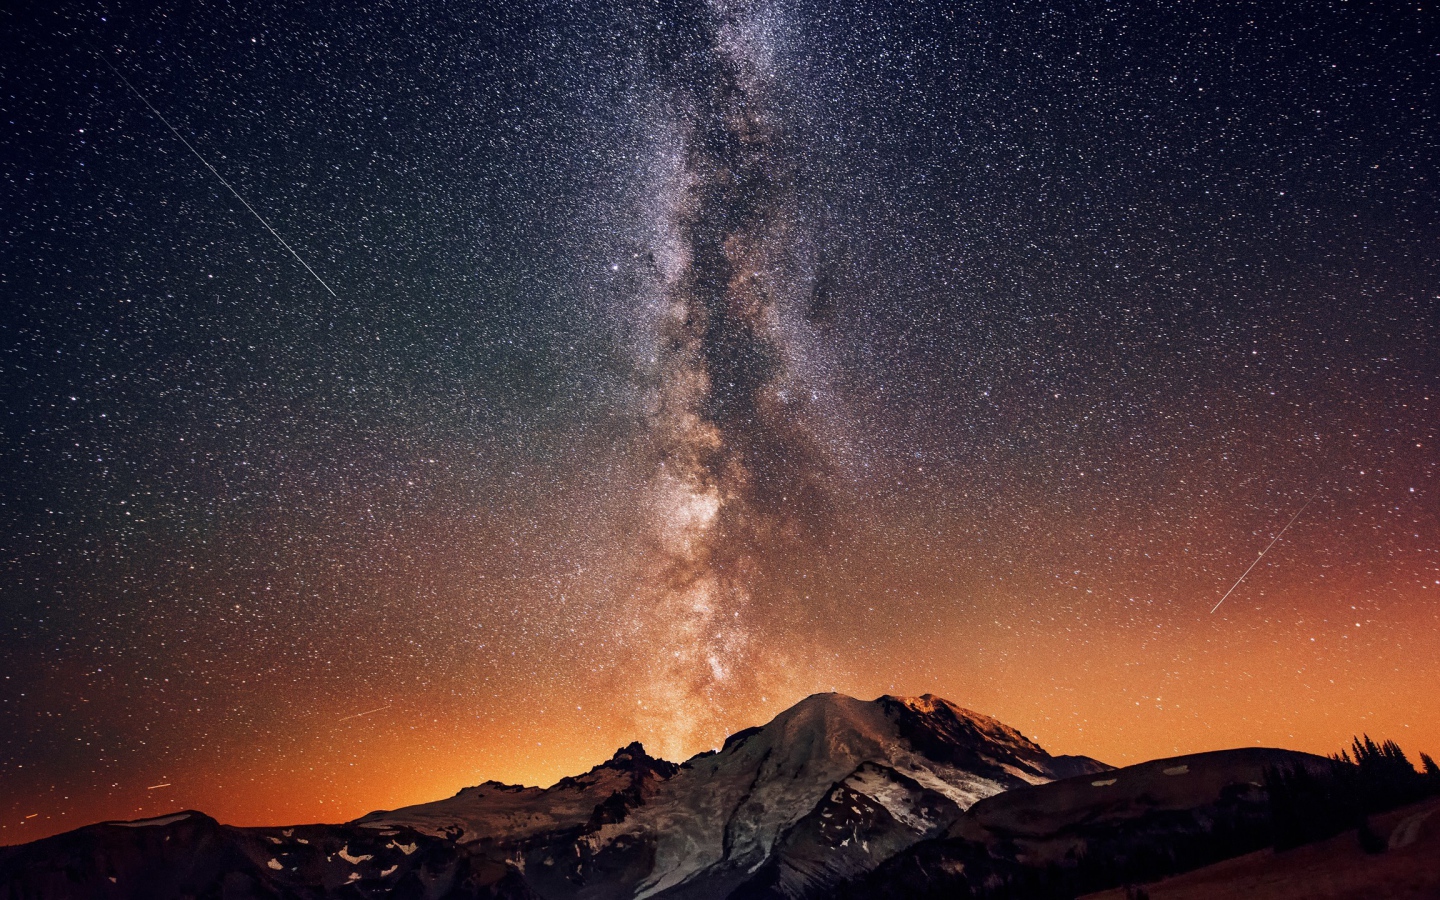 The milky way in the starry sky over the mountain